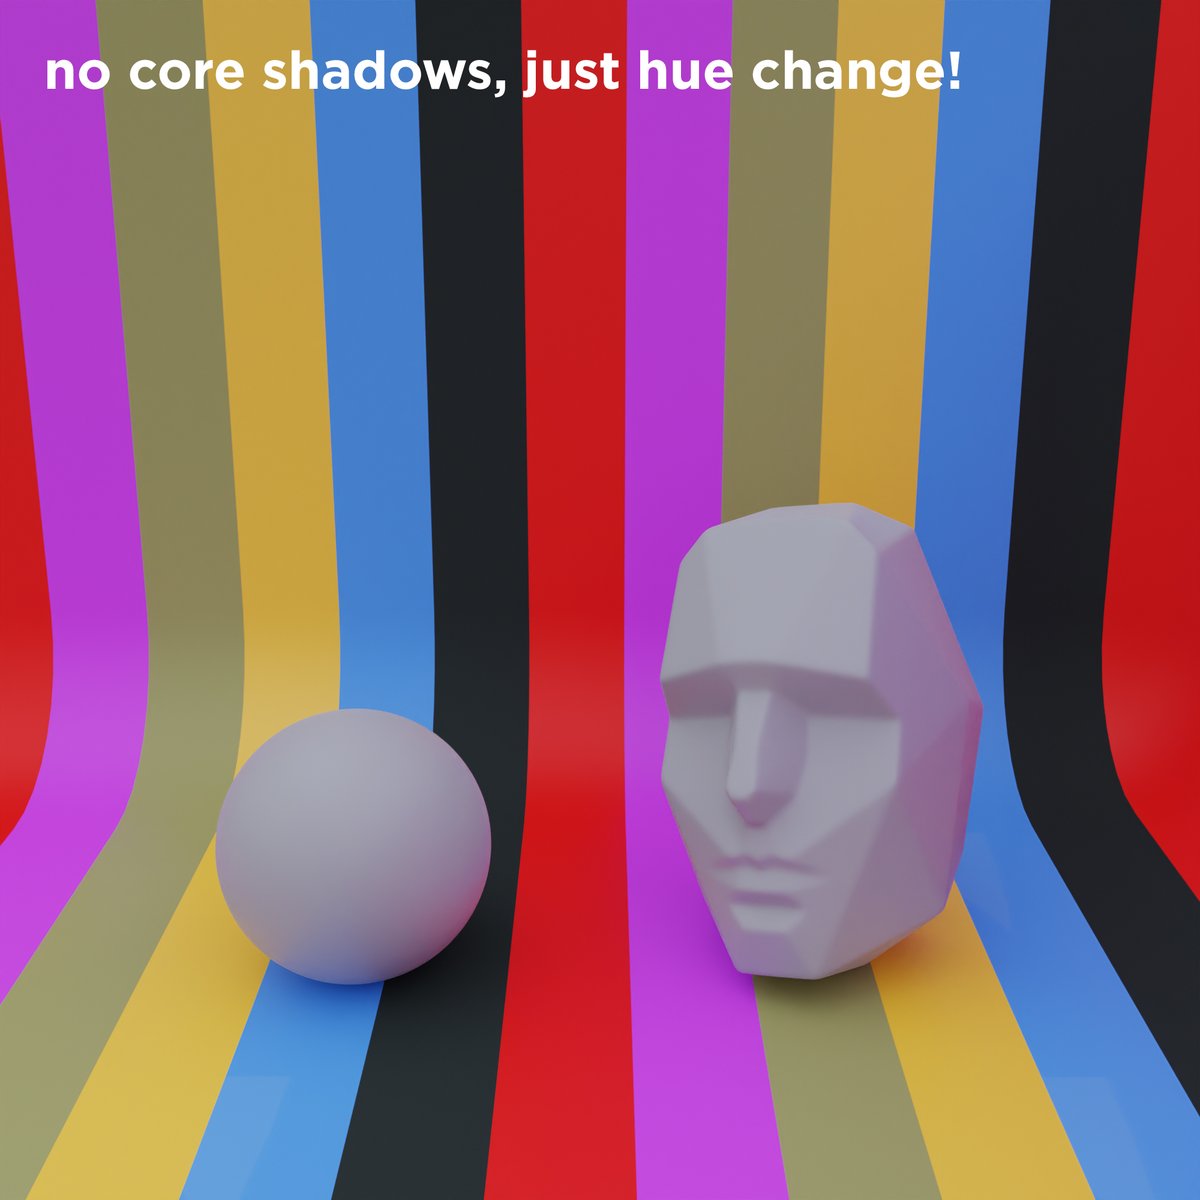 See how minimized the core shadows are here, but notice the variety of hue shifts caused by the ground.